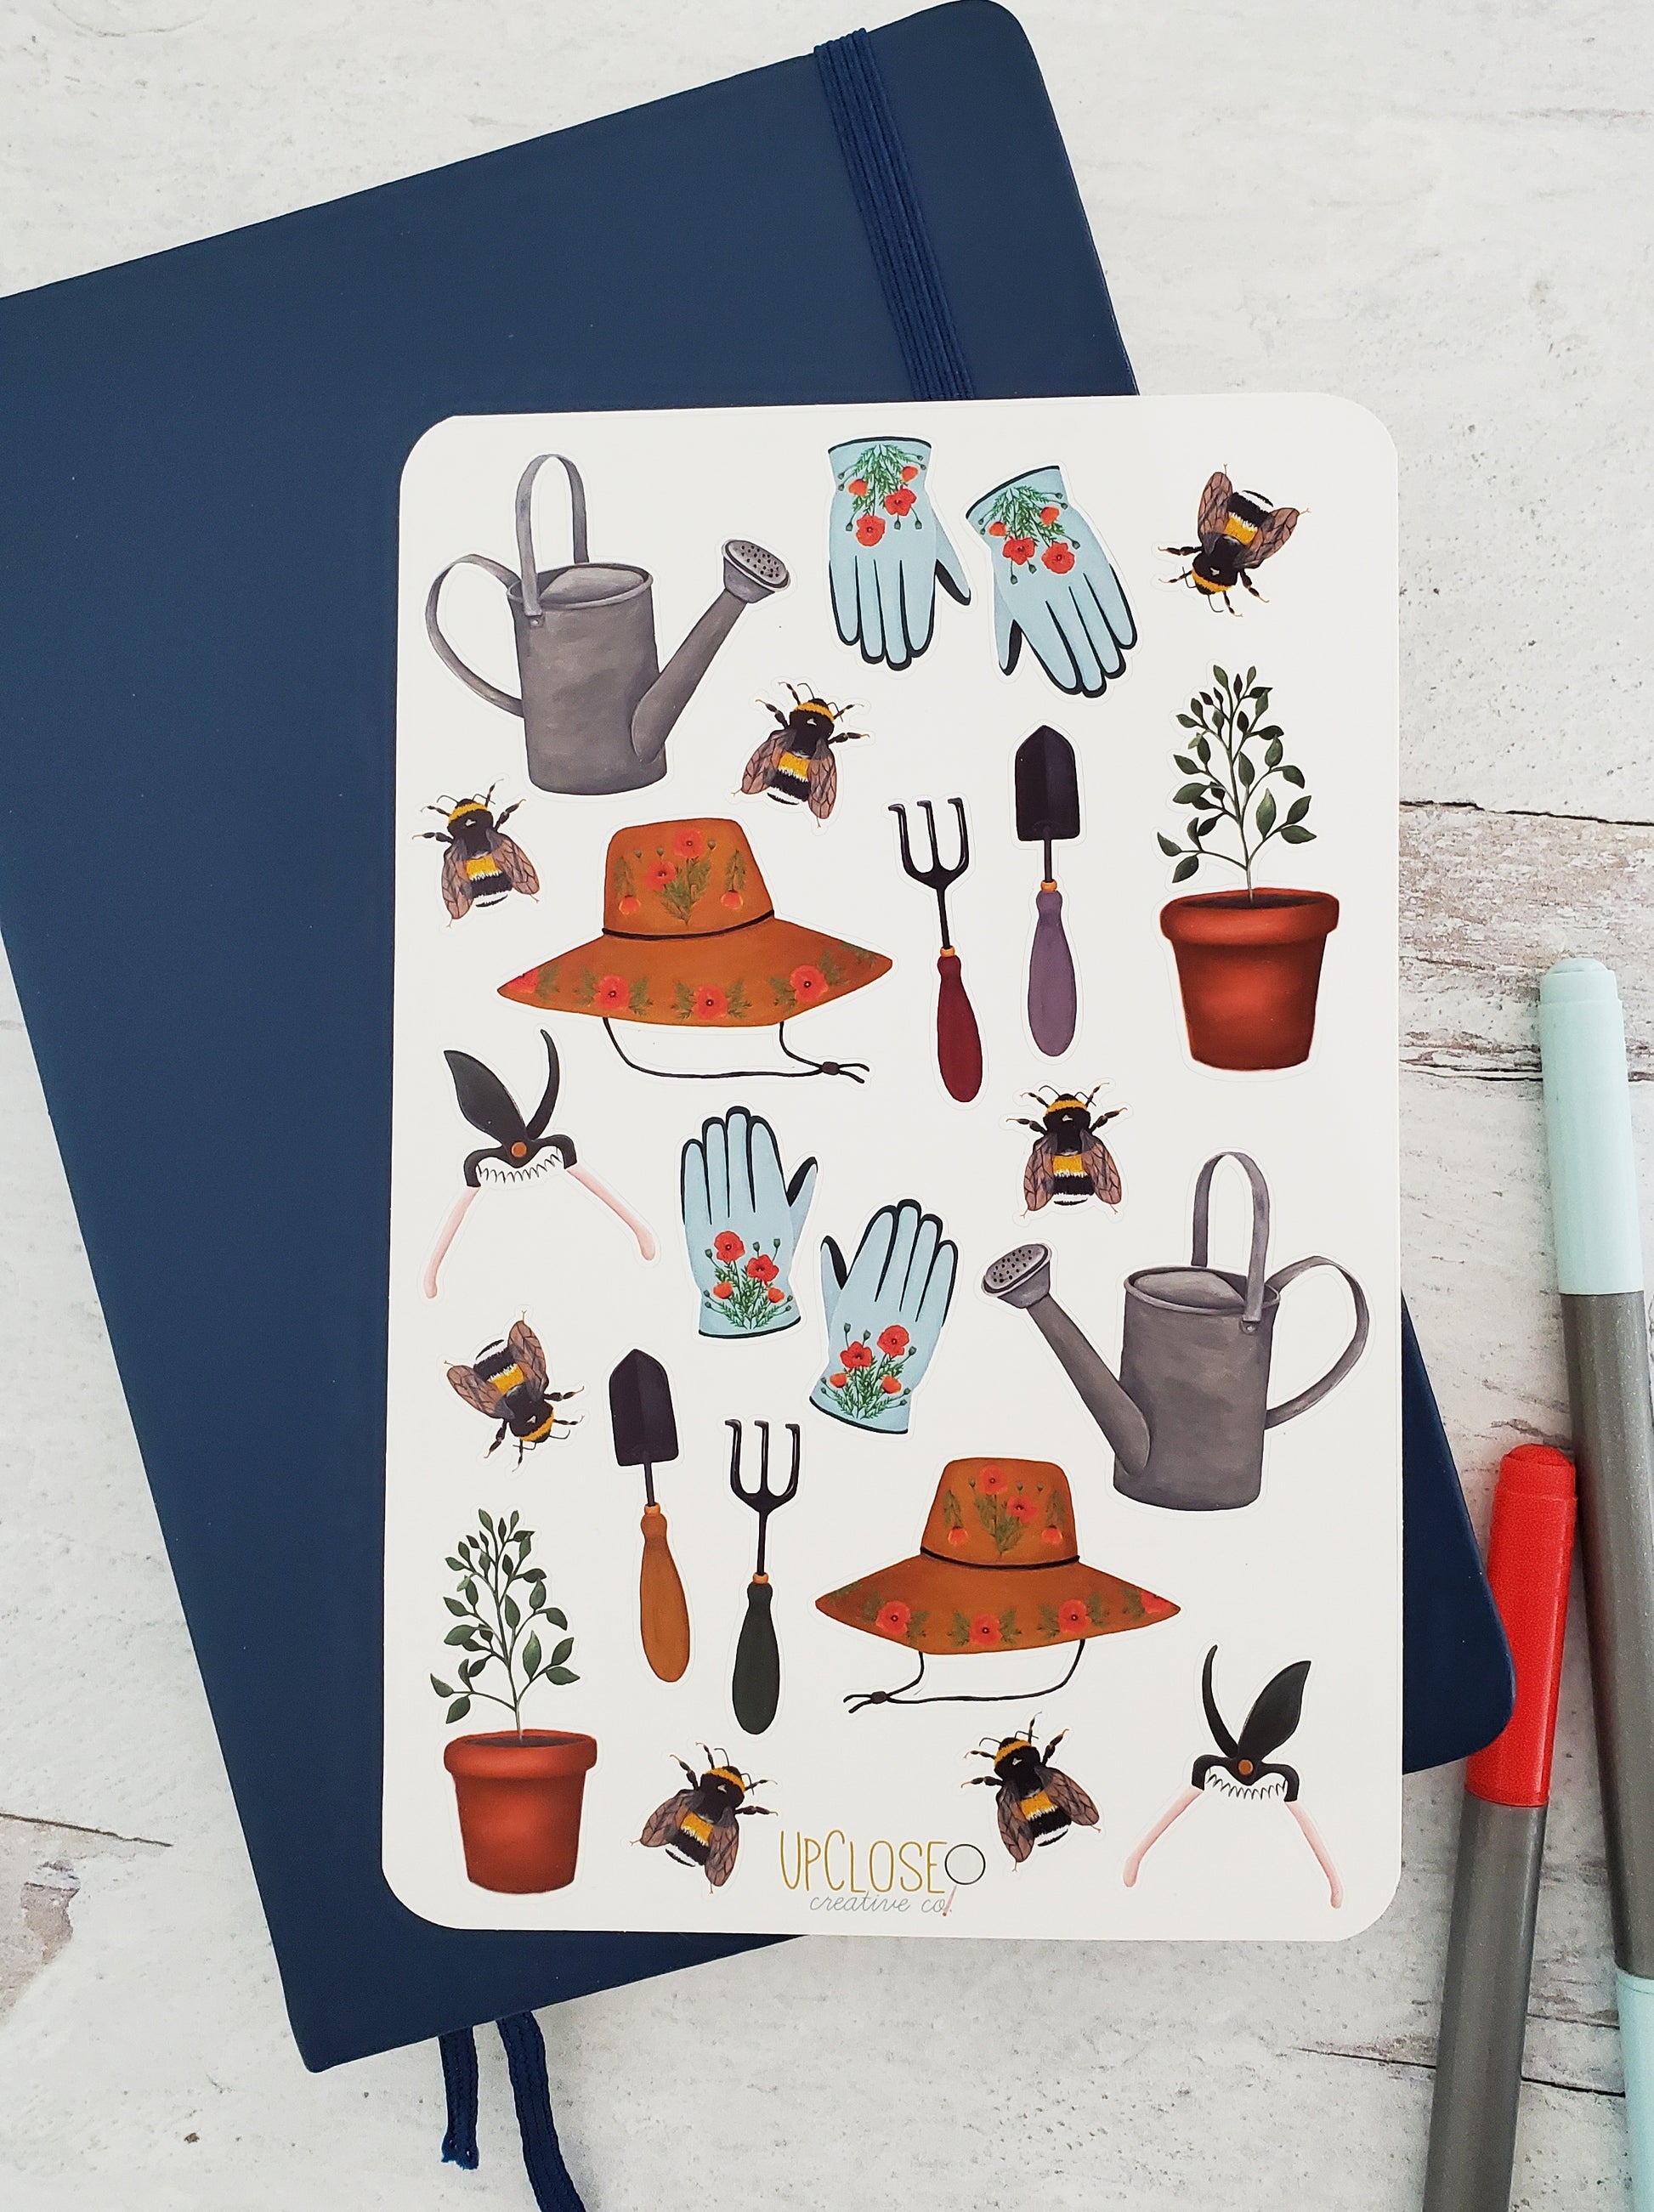 Sticker sheet with assorted gardening themed items. Includes watering can, gloves, hat, garden tools, bees and a plant.